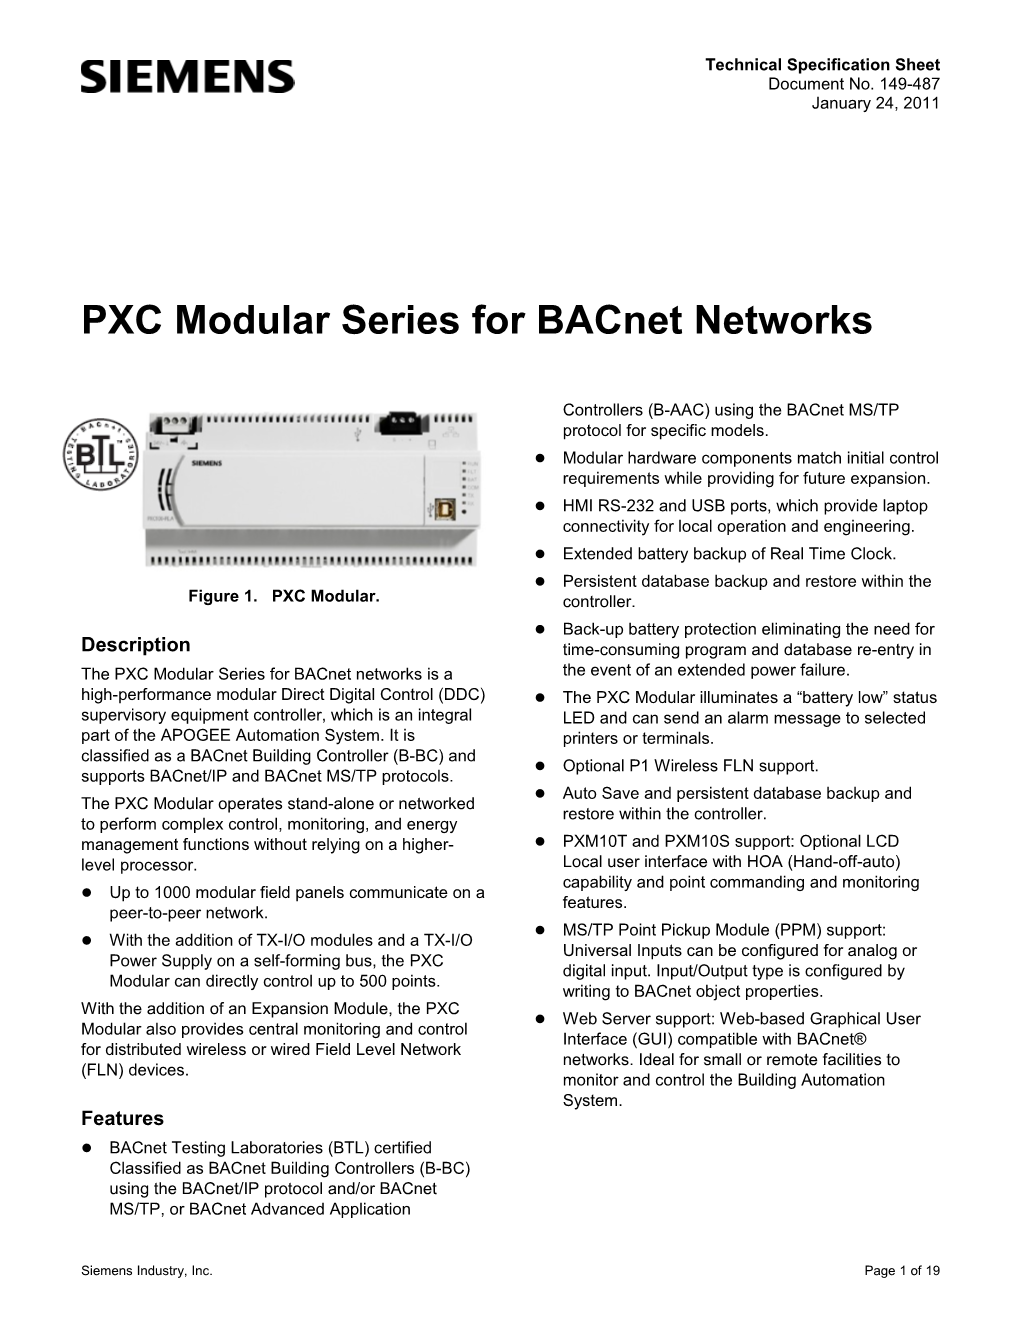 PXC Modular Series for Bacnet Networks